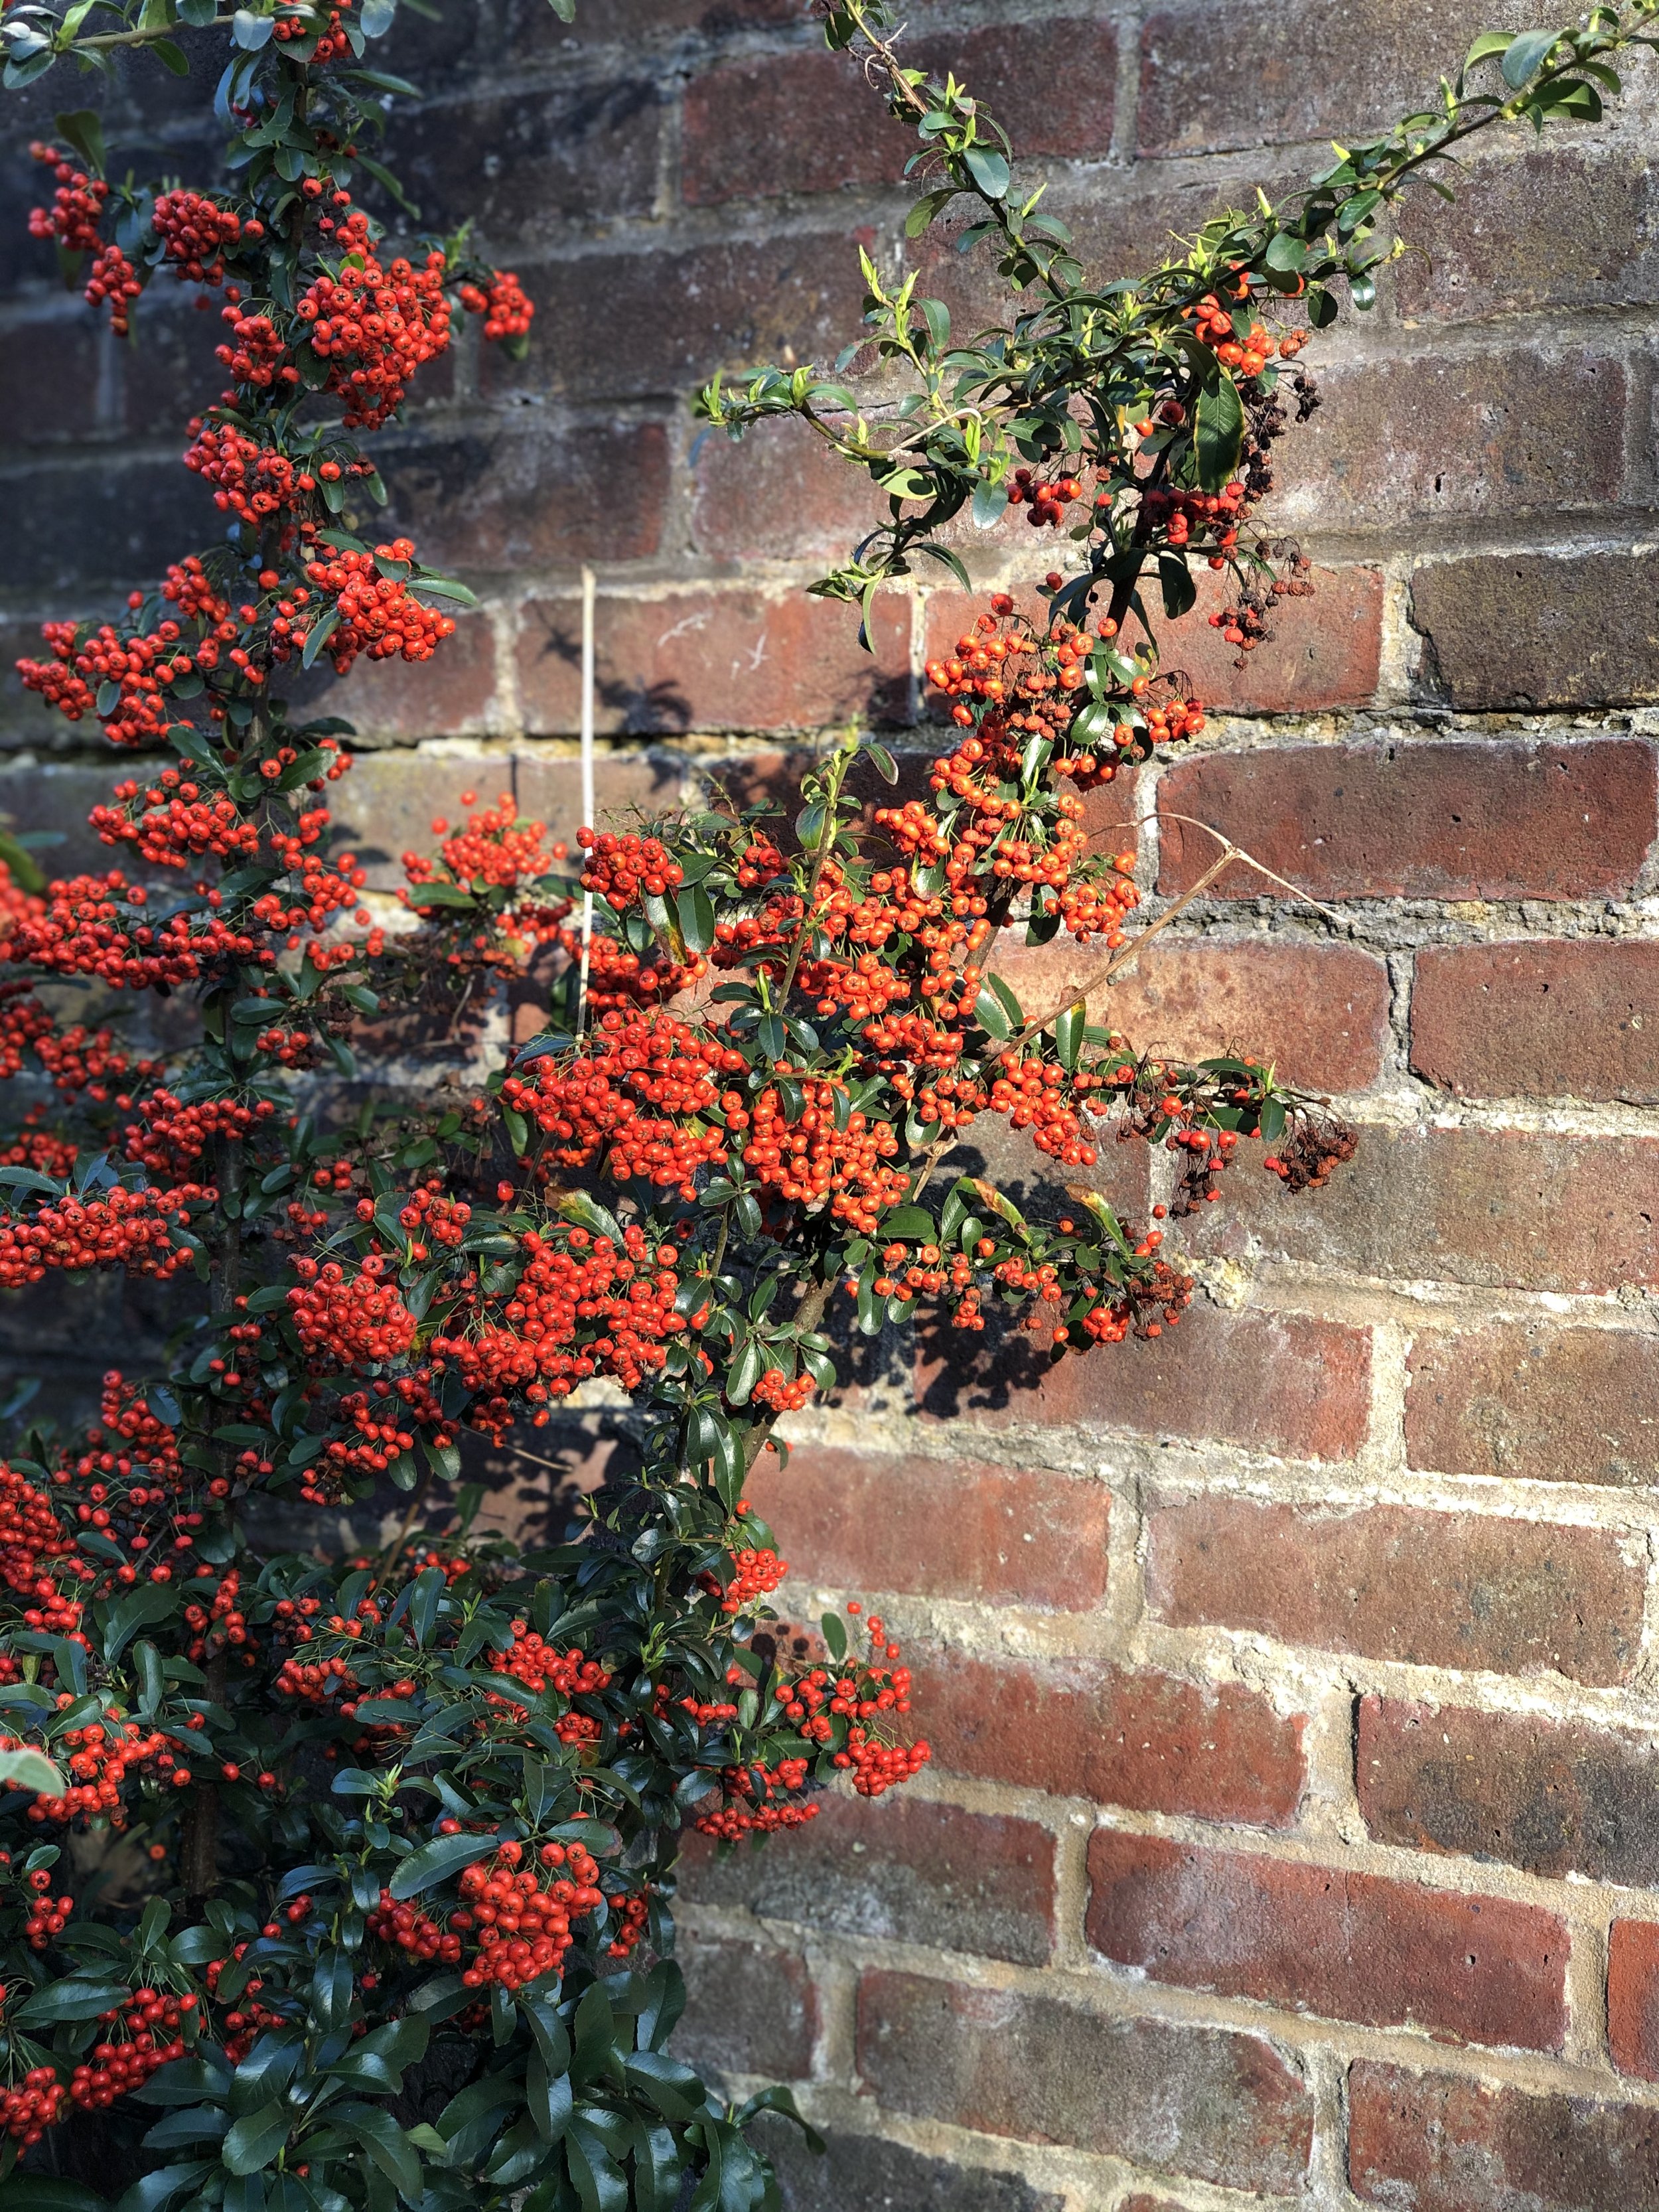 Company, Place colour study - Post box red Pyracantha Berries on brick Lomond Close